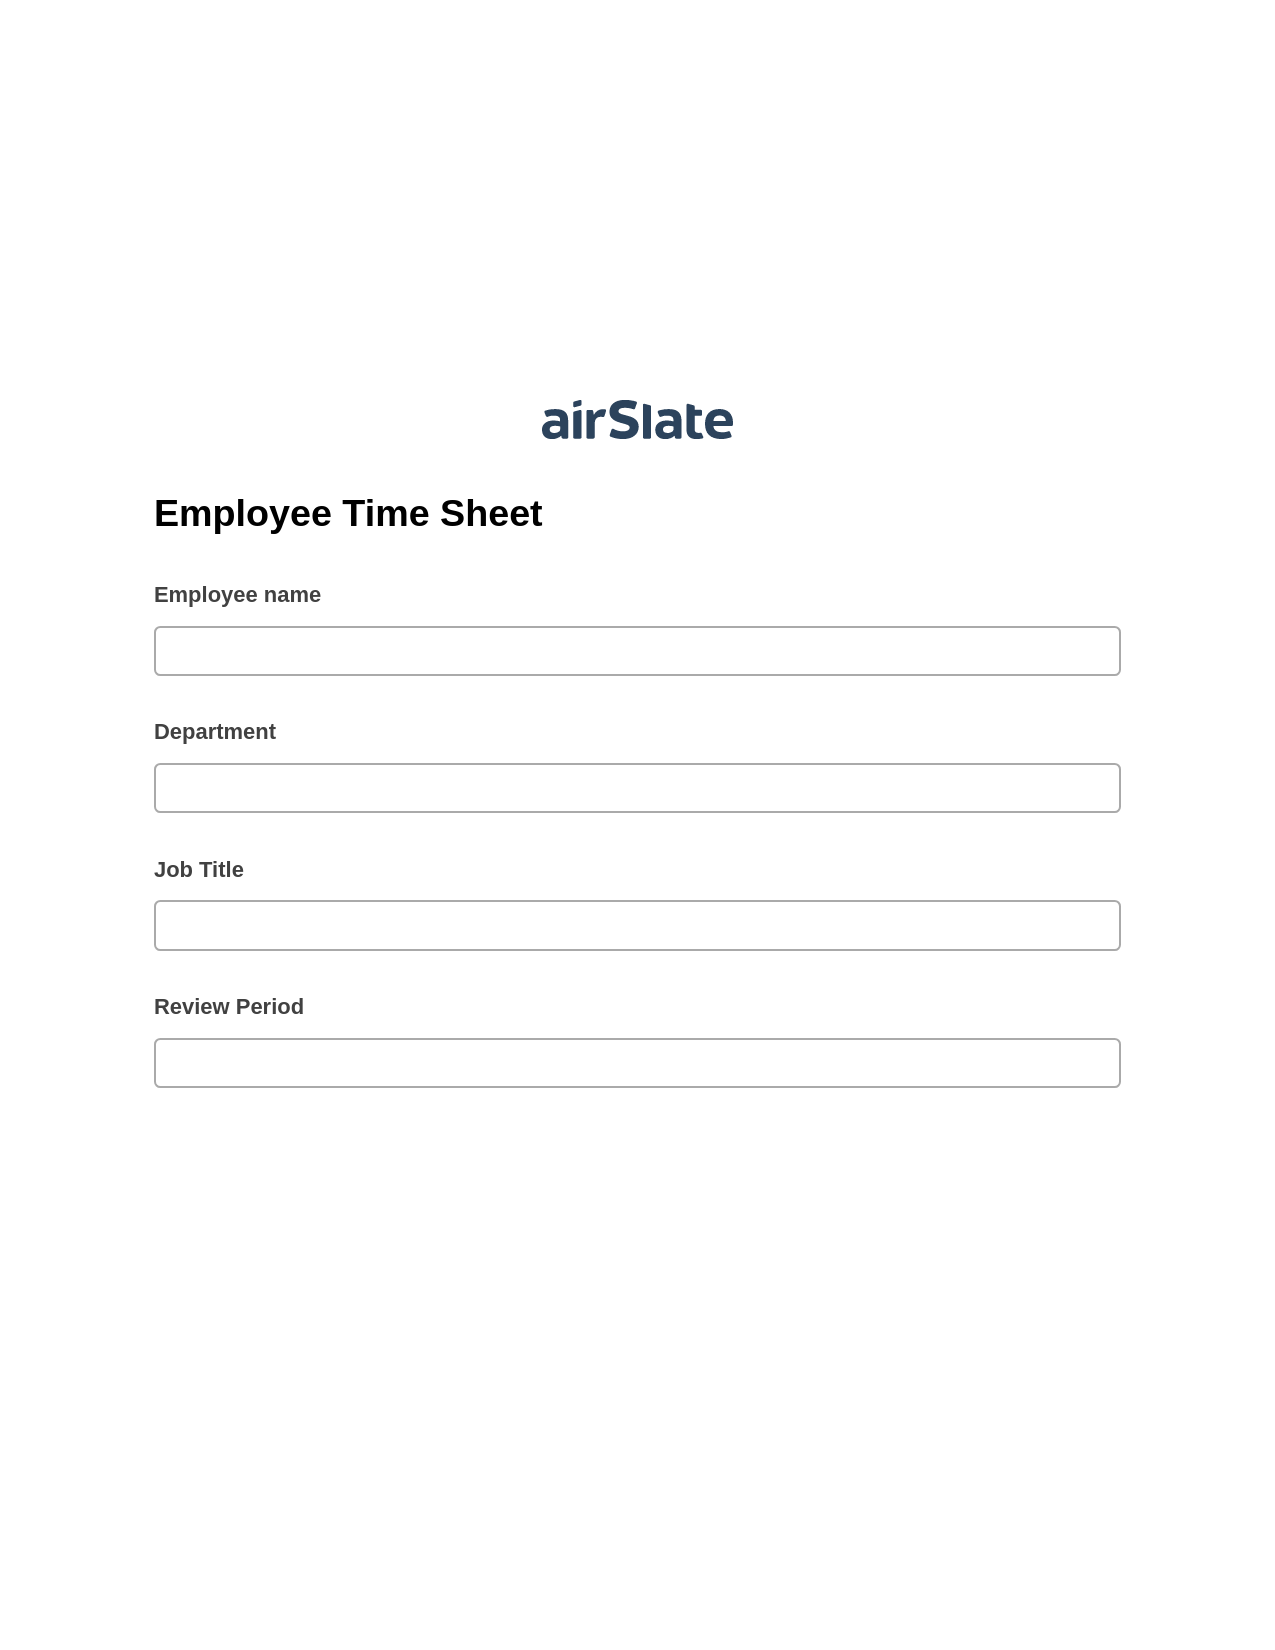 Multirole Employee Time Sheet Pre-fill Document Bot, Remove Tags From Slate Bot, Slack Two-Way Binding Bot